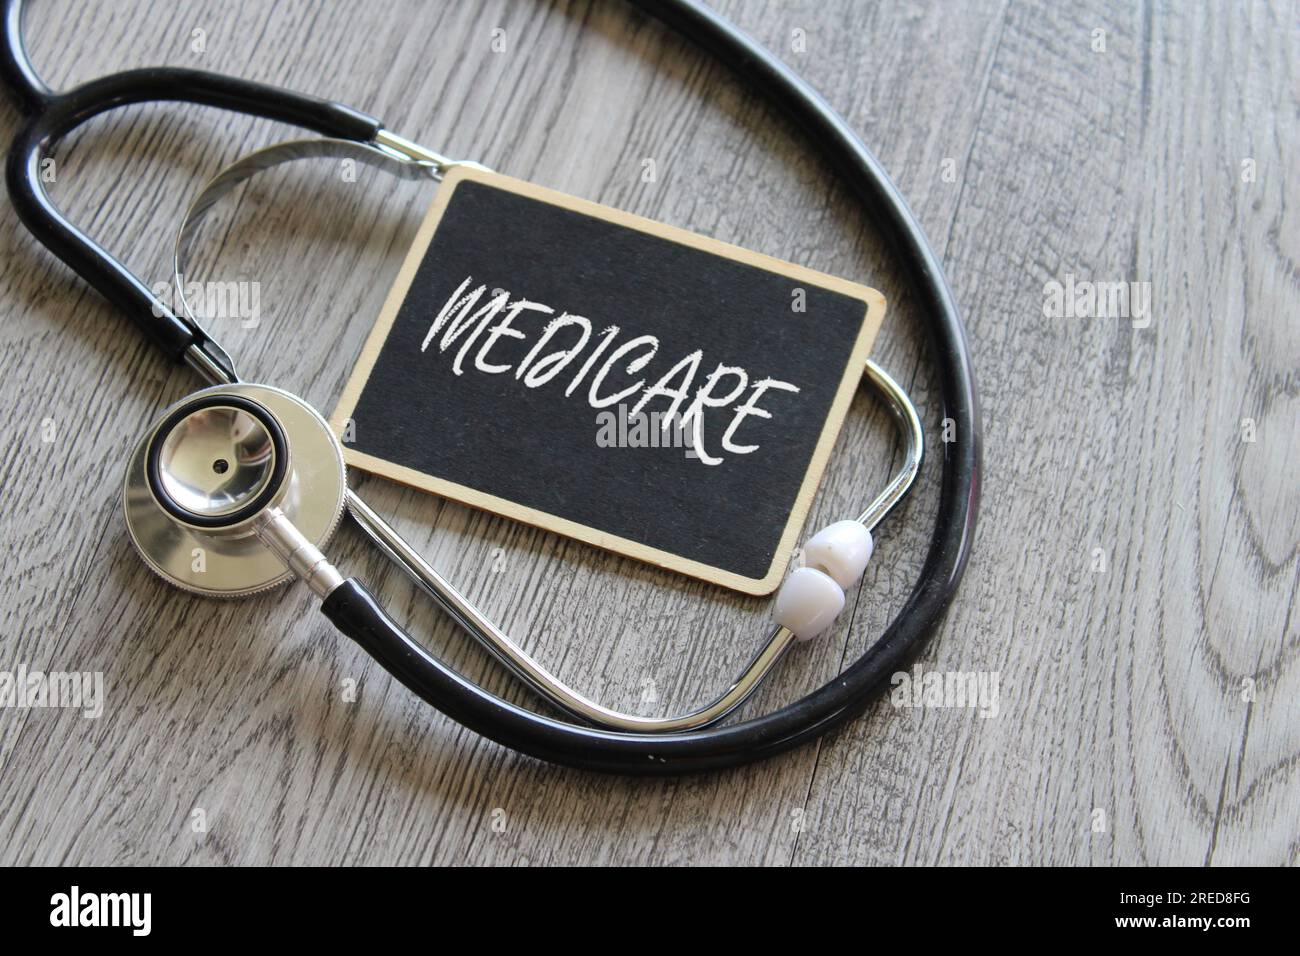 Close up image of stethoscope and chalkboard with text MEDICARE. Medical and healthcare concept Stock Photo